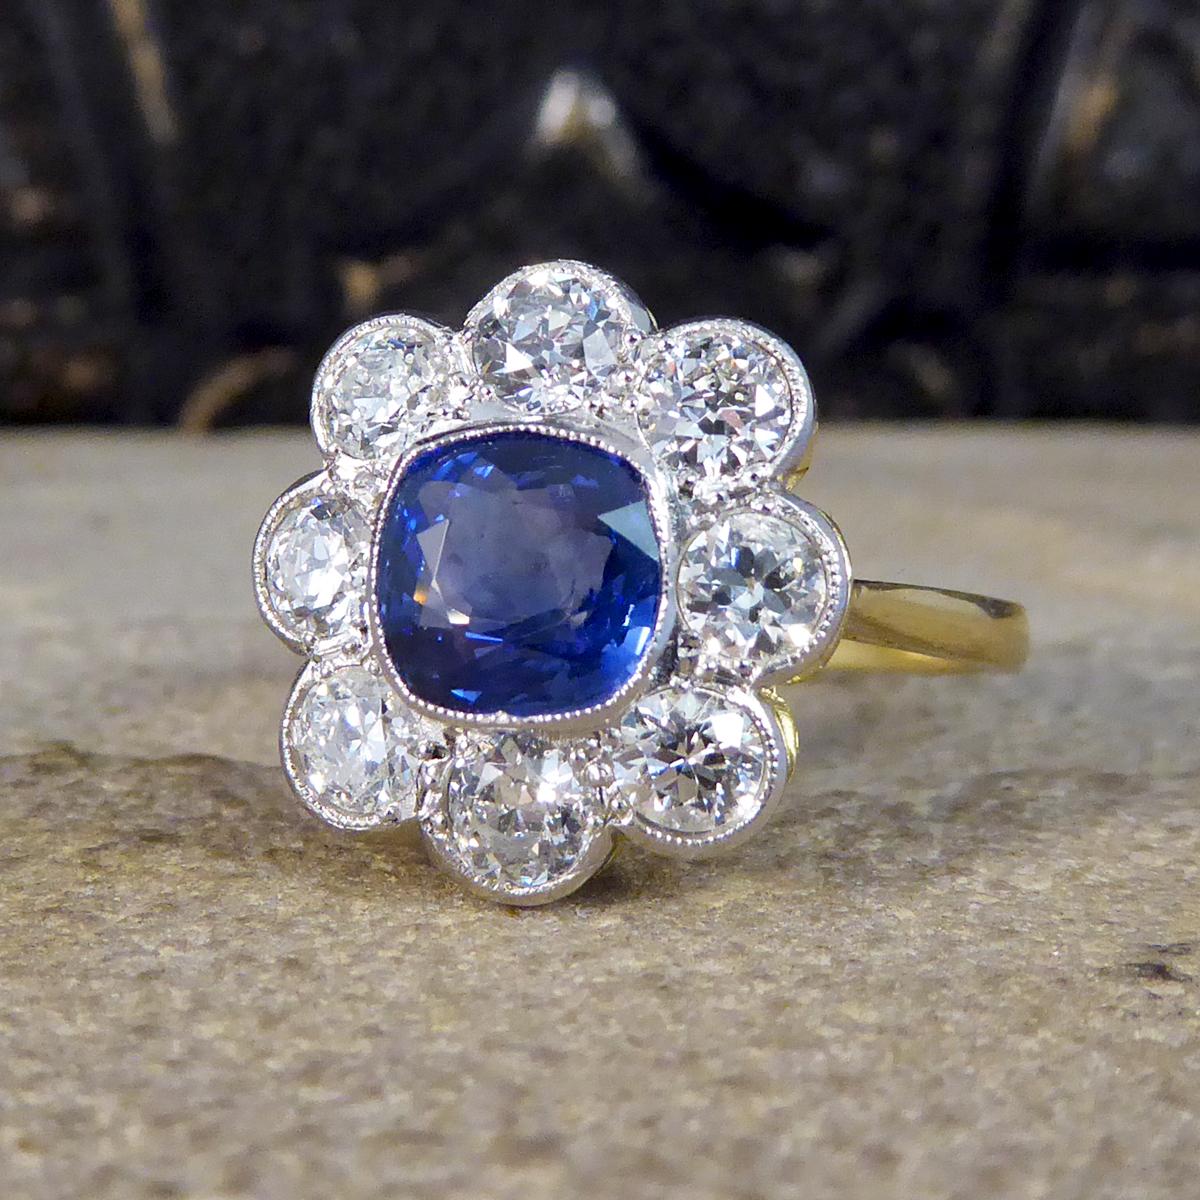 Edwardian Contemporary 1.40ct Sapphire and 1.35ct Diamond Cluster Ring in 18ct Gold